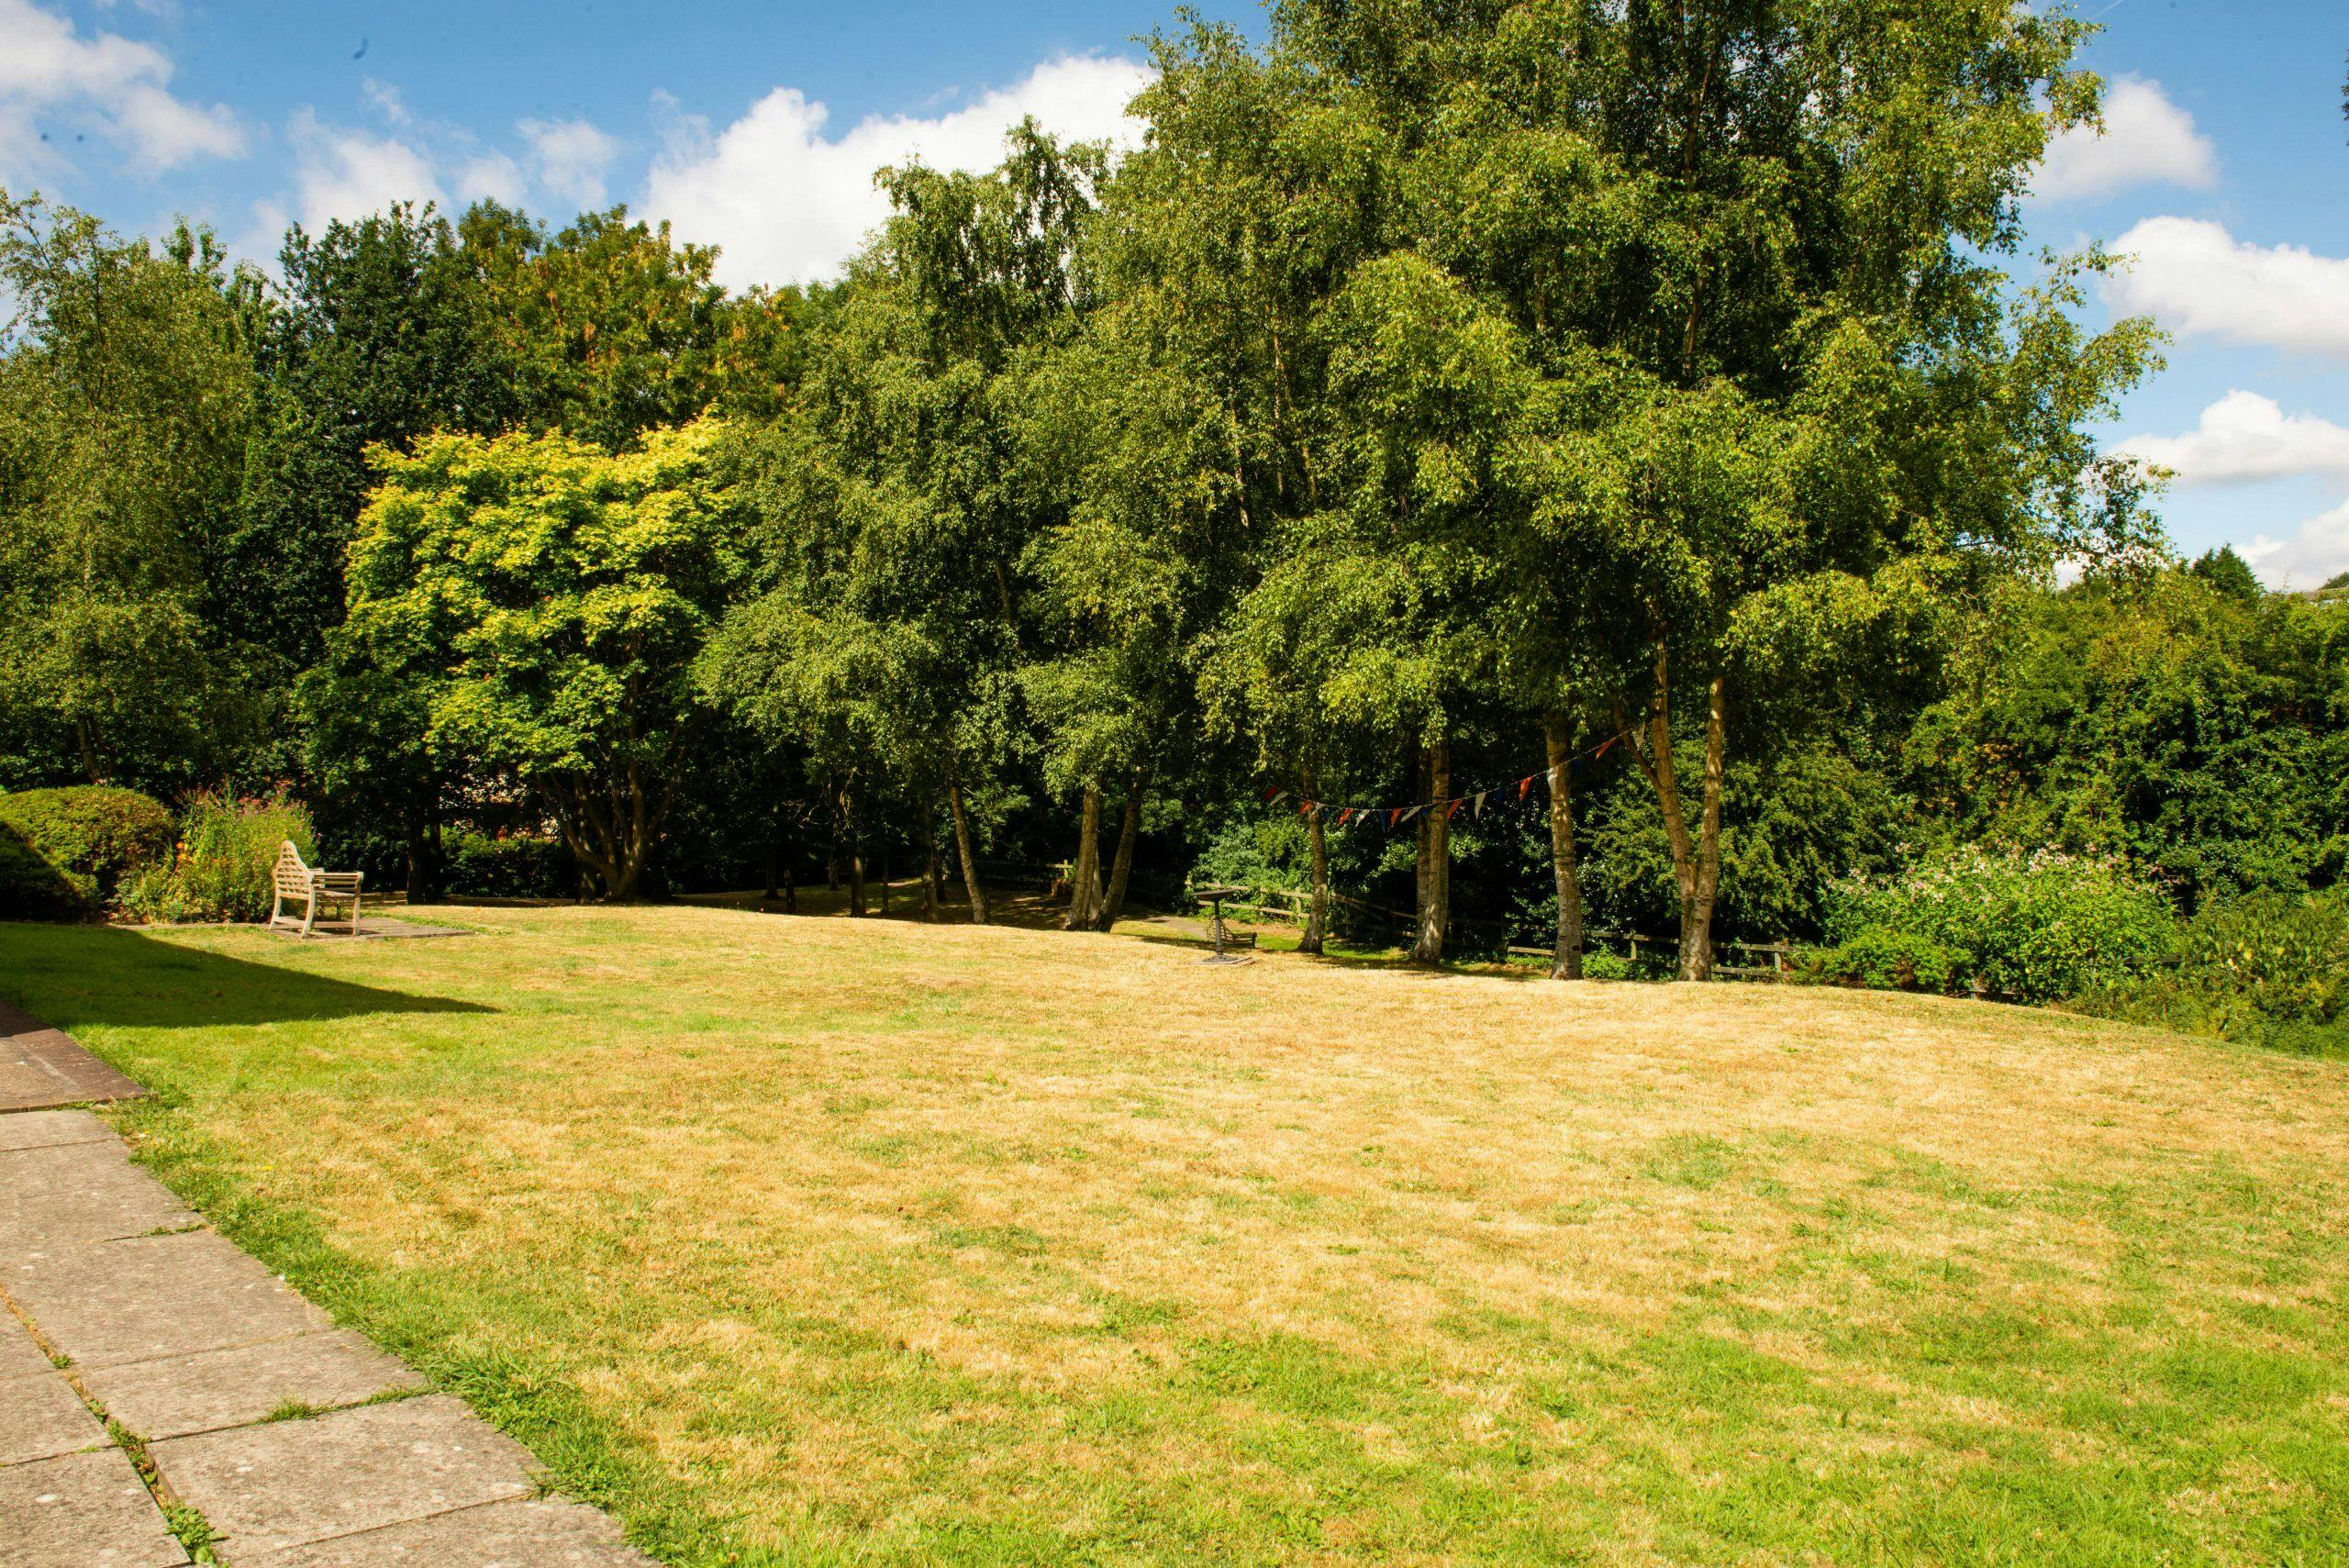 Grounds of The Firs Care Home in Ripley, Derbyshire